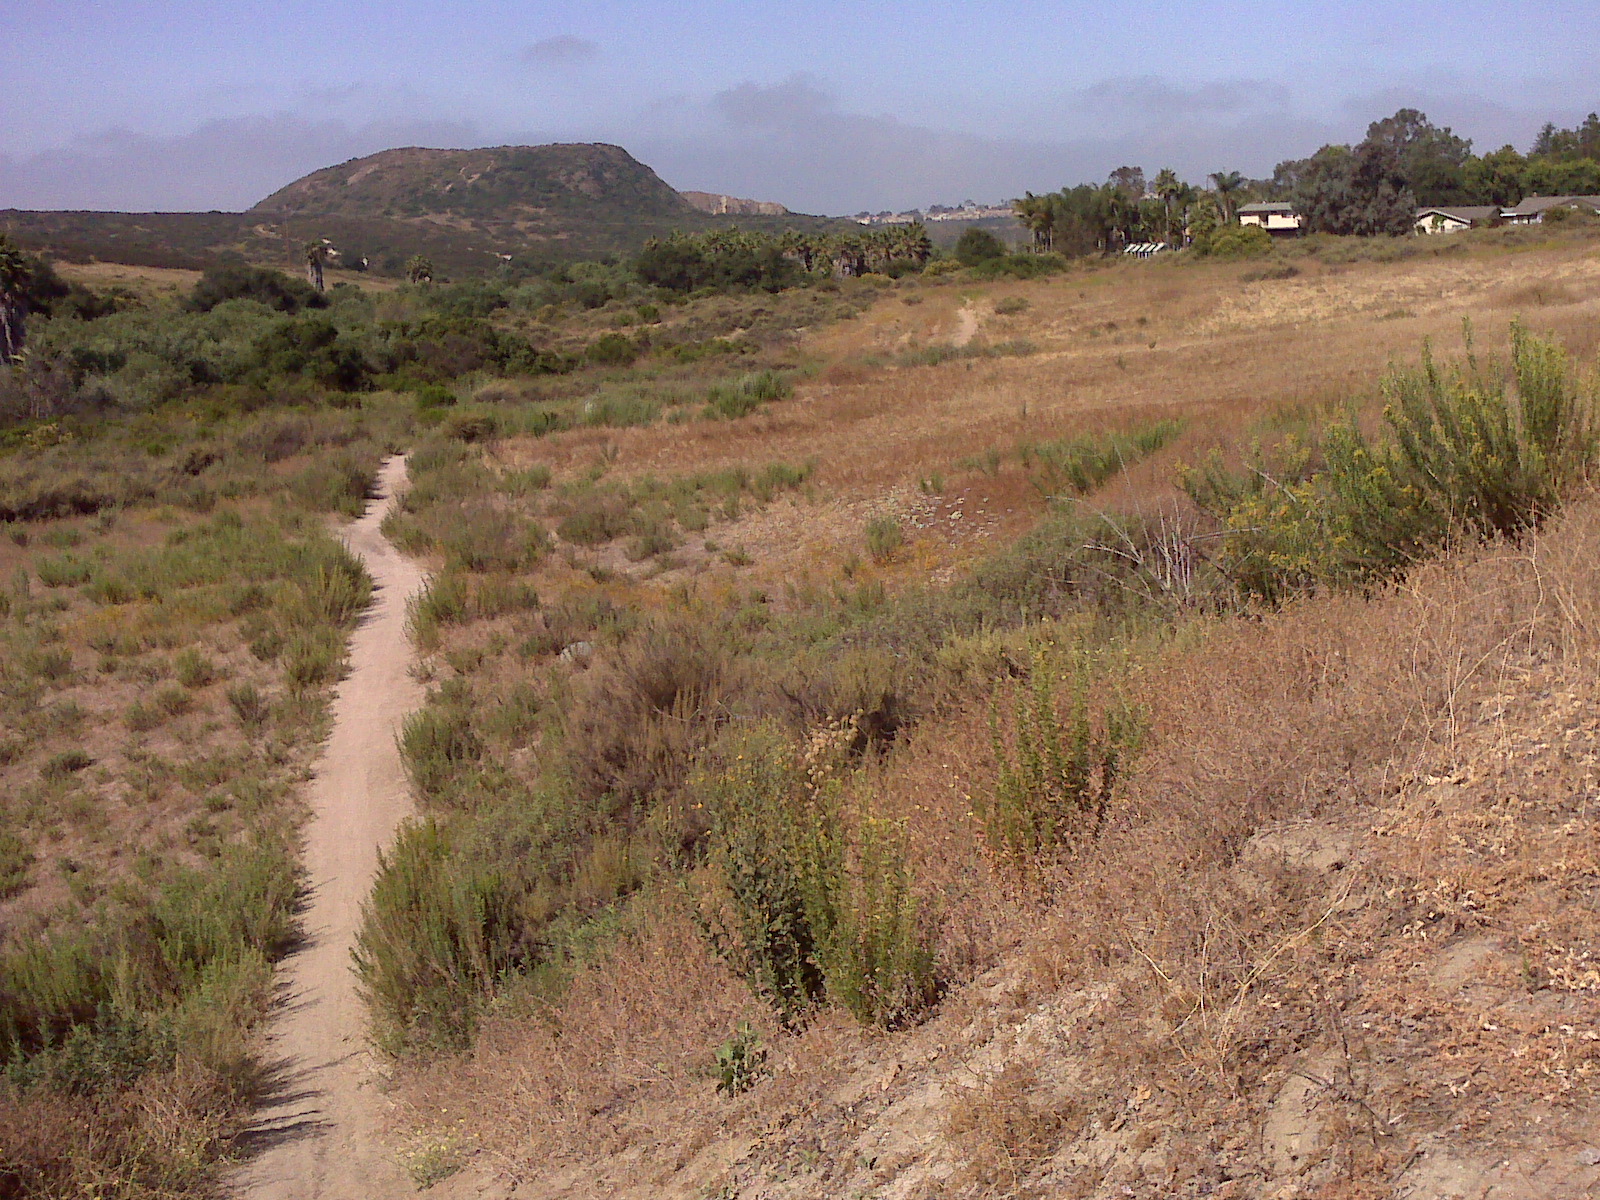 This trail in Calavera Preserve (110 acres) eventually takes hikers to the top of 513-feet-high Mount Calavera, seen in the background. The formation is not really a mountain but a 15- to 20-million-year-old volcanic plug. A dramatic cliff on one side, which can be seen from the trail, is the remnant of gravel mining in the early 1900s. The word Calavera is Spanish for "skull. Photos by E’Louise Ondash